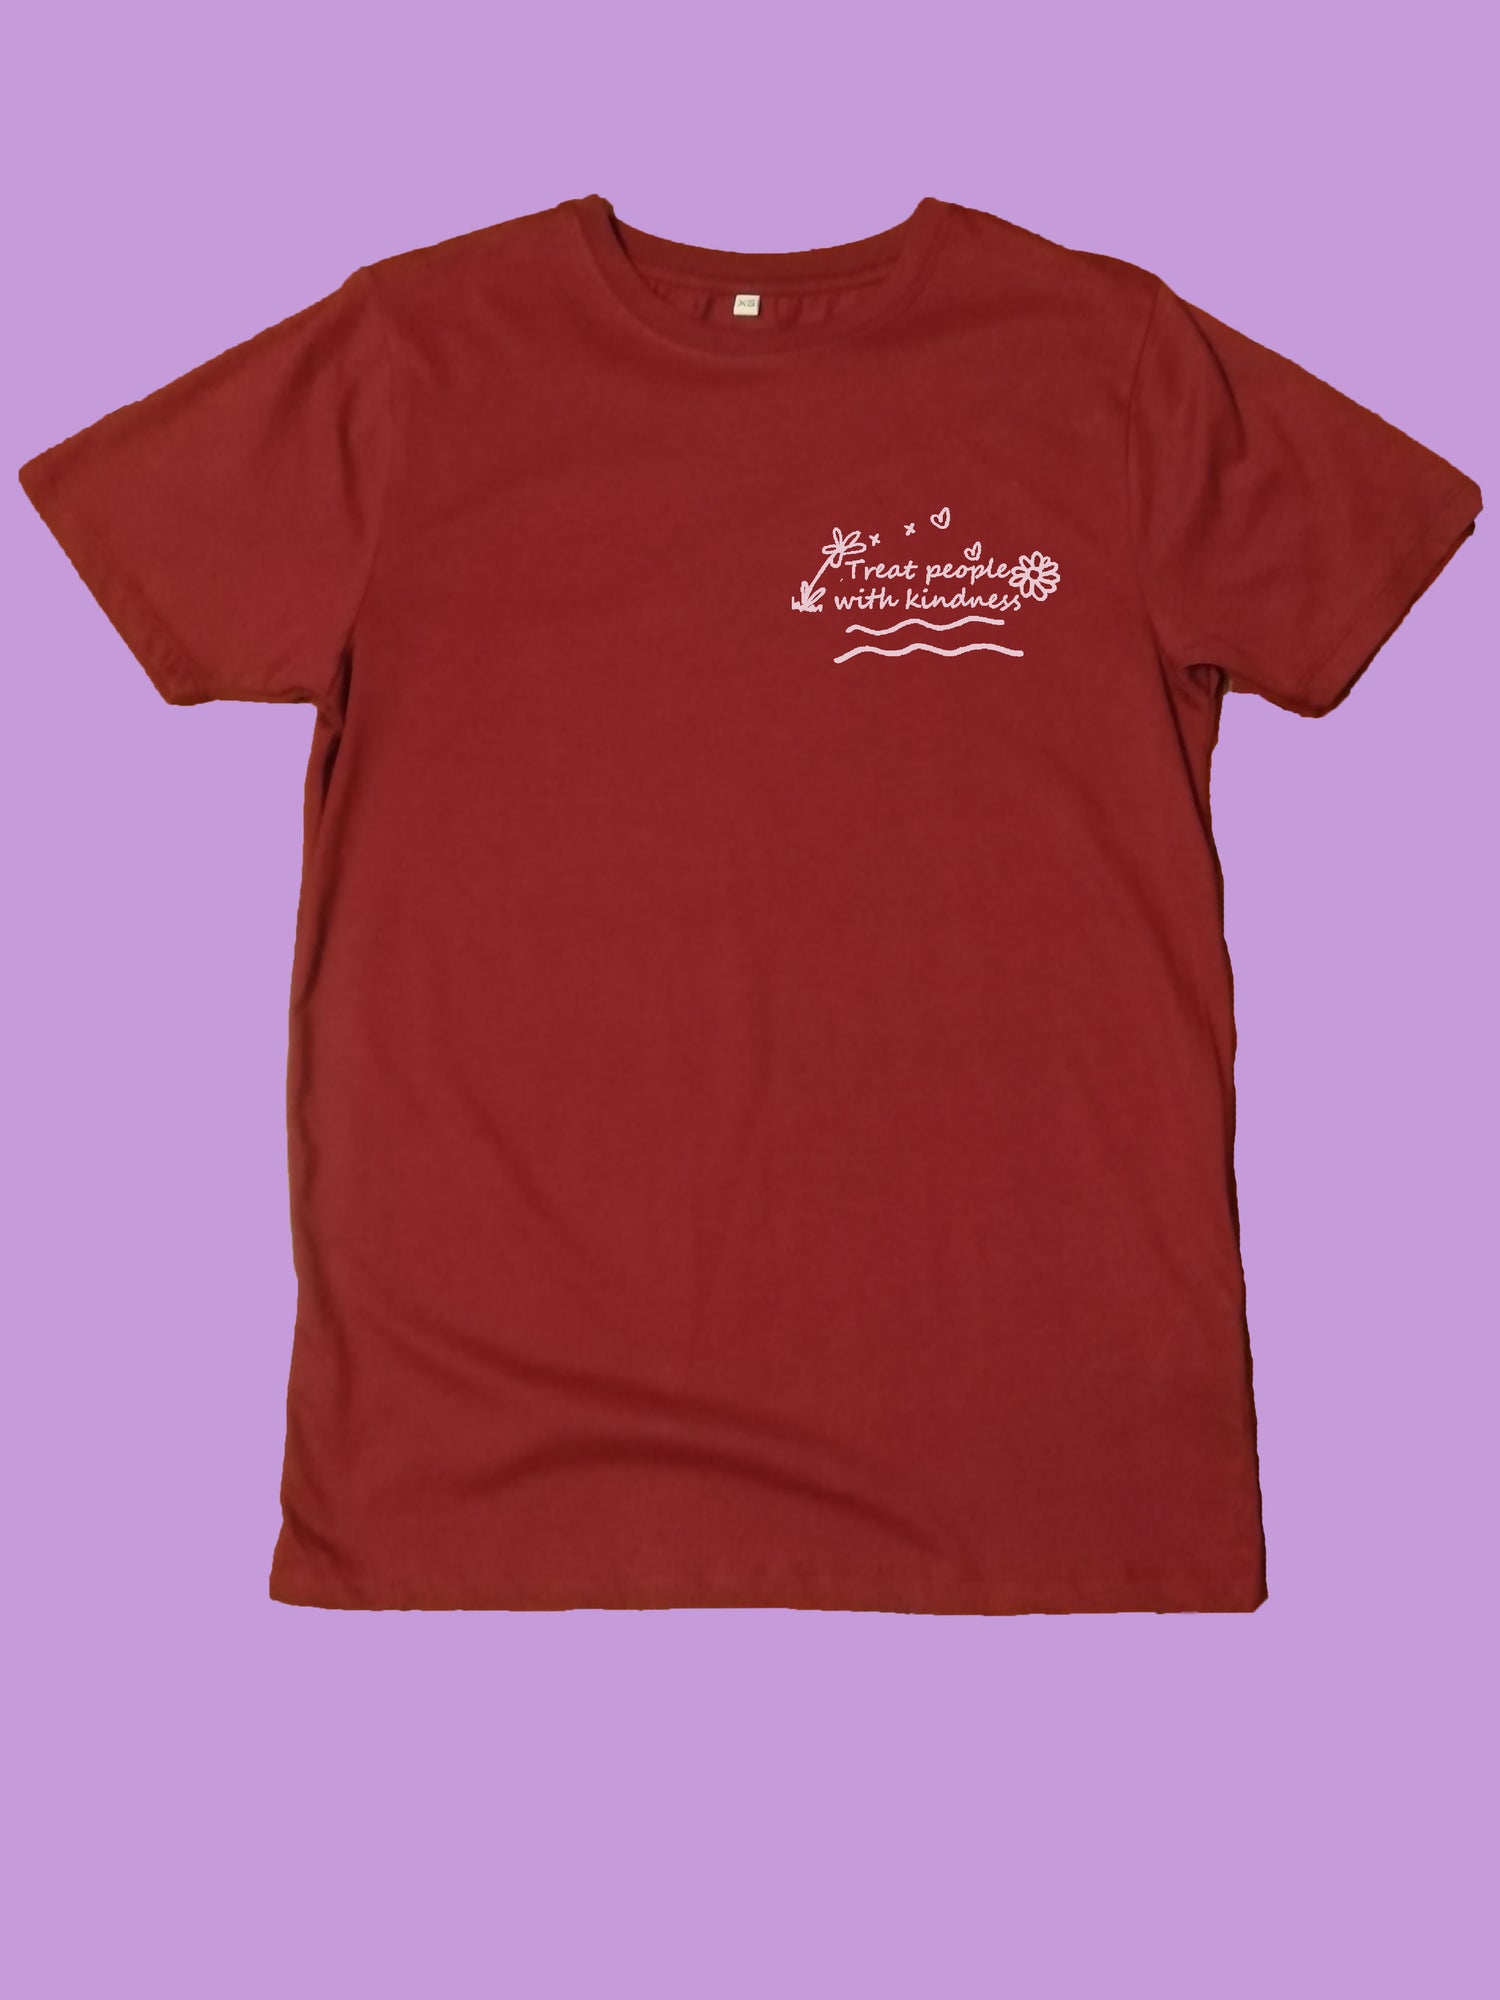 Treat people with kindness Organic T Shirt